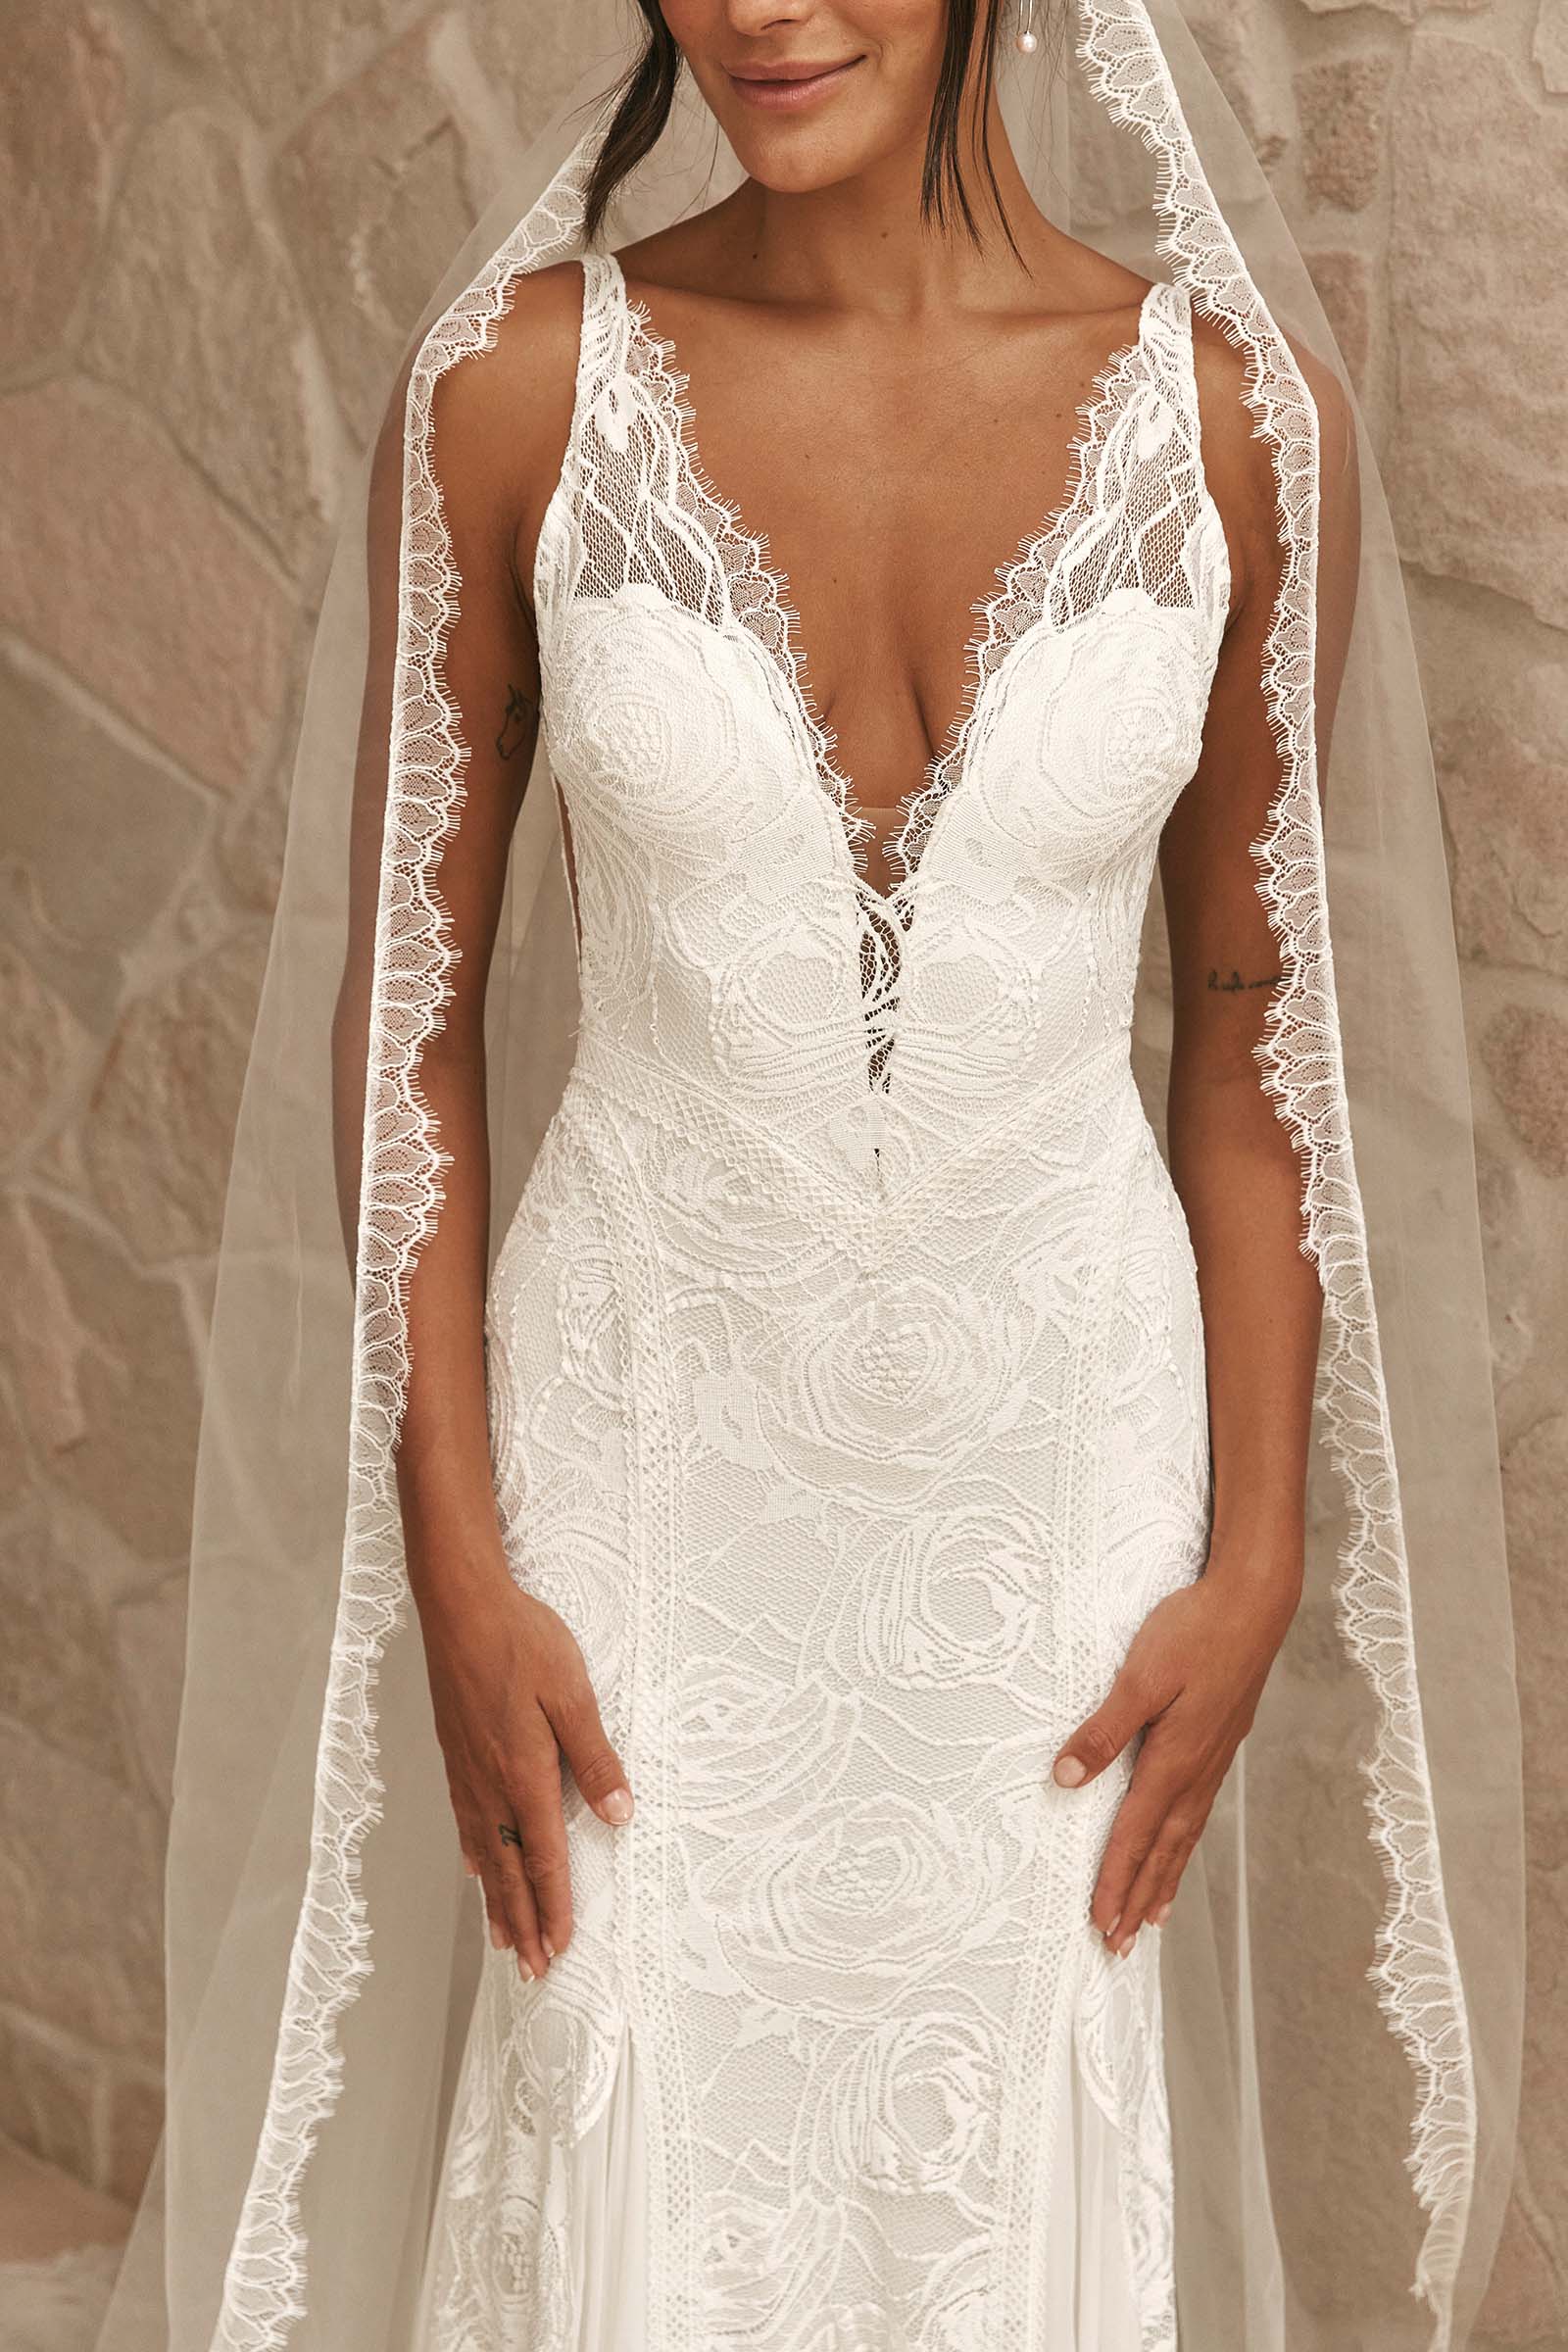 With exquisite lace detailing, a flattering V neckline, and a chic